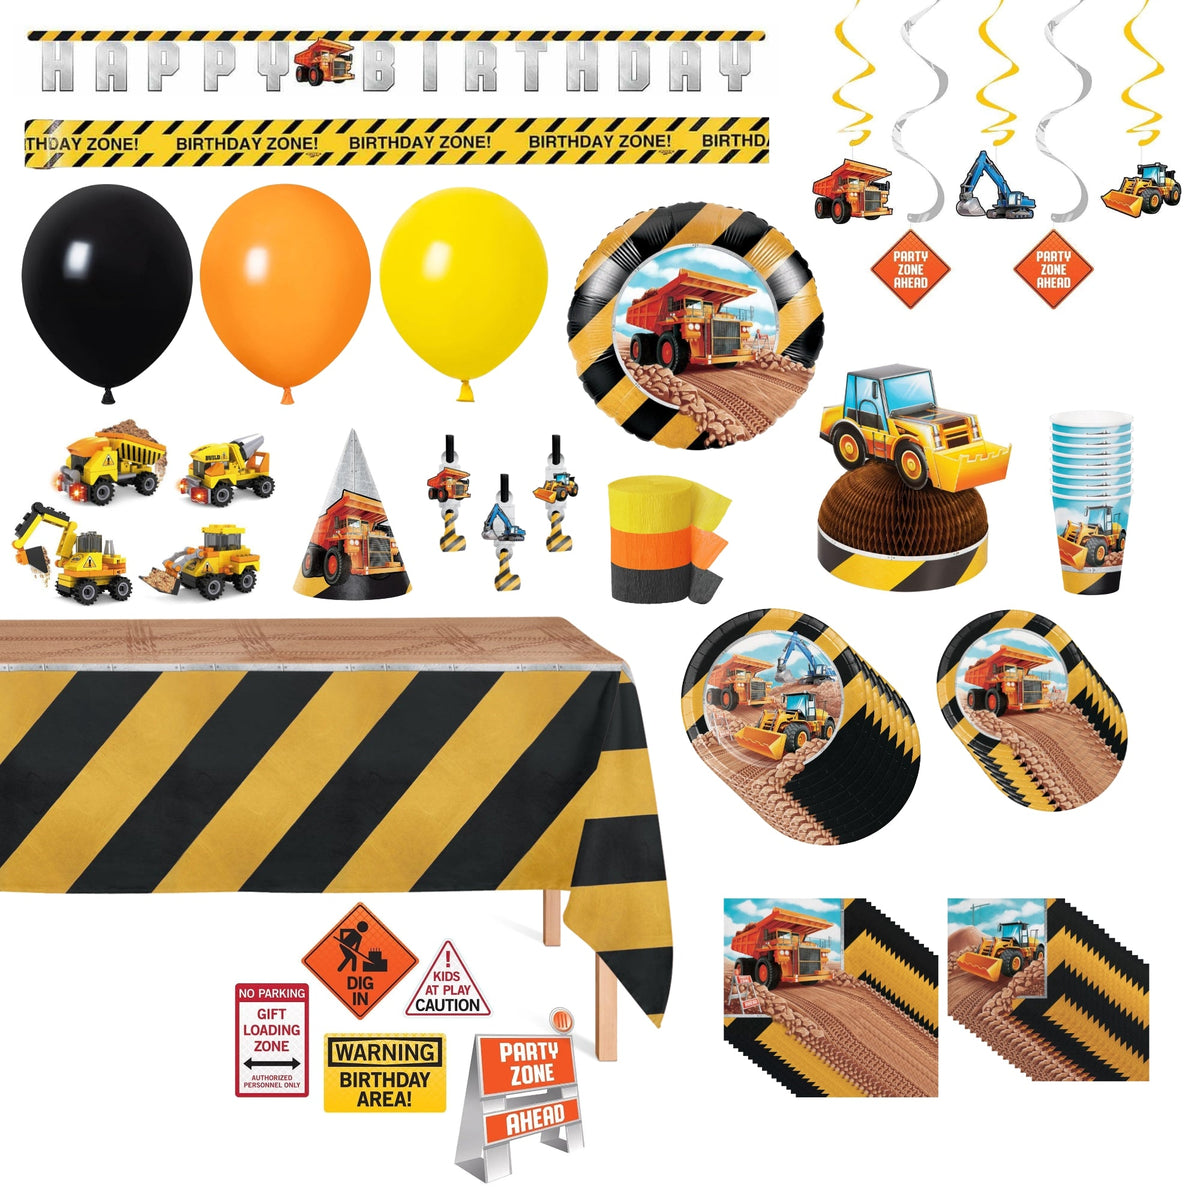 Party Expert Kids Birthday Big Dig Construction Ultimate Birthday Party Kit